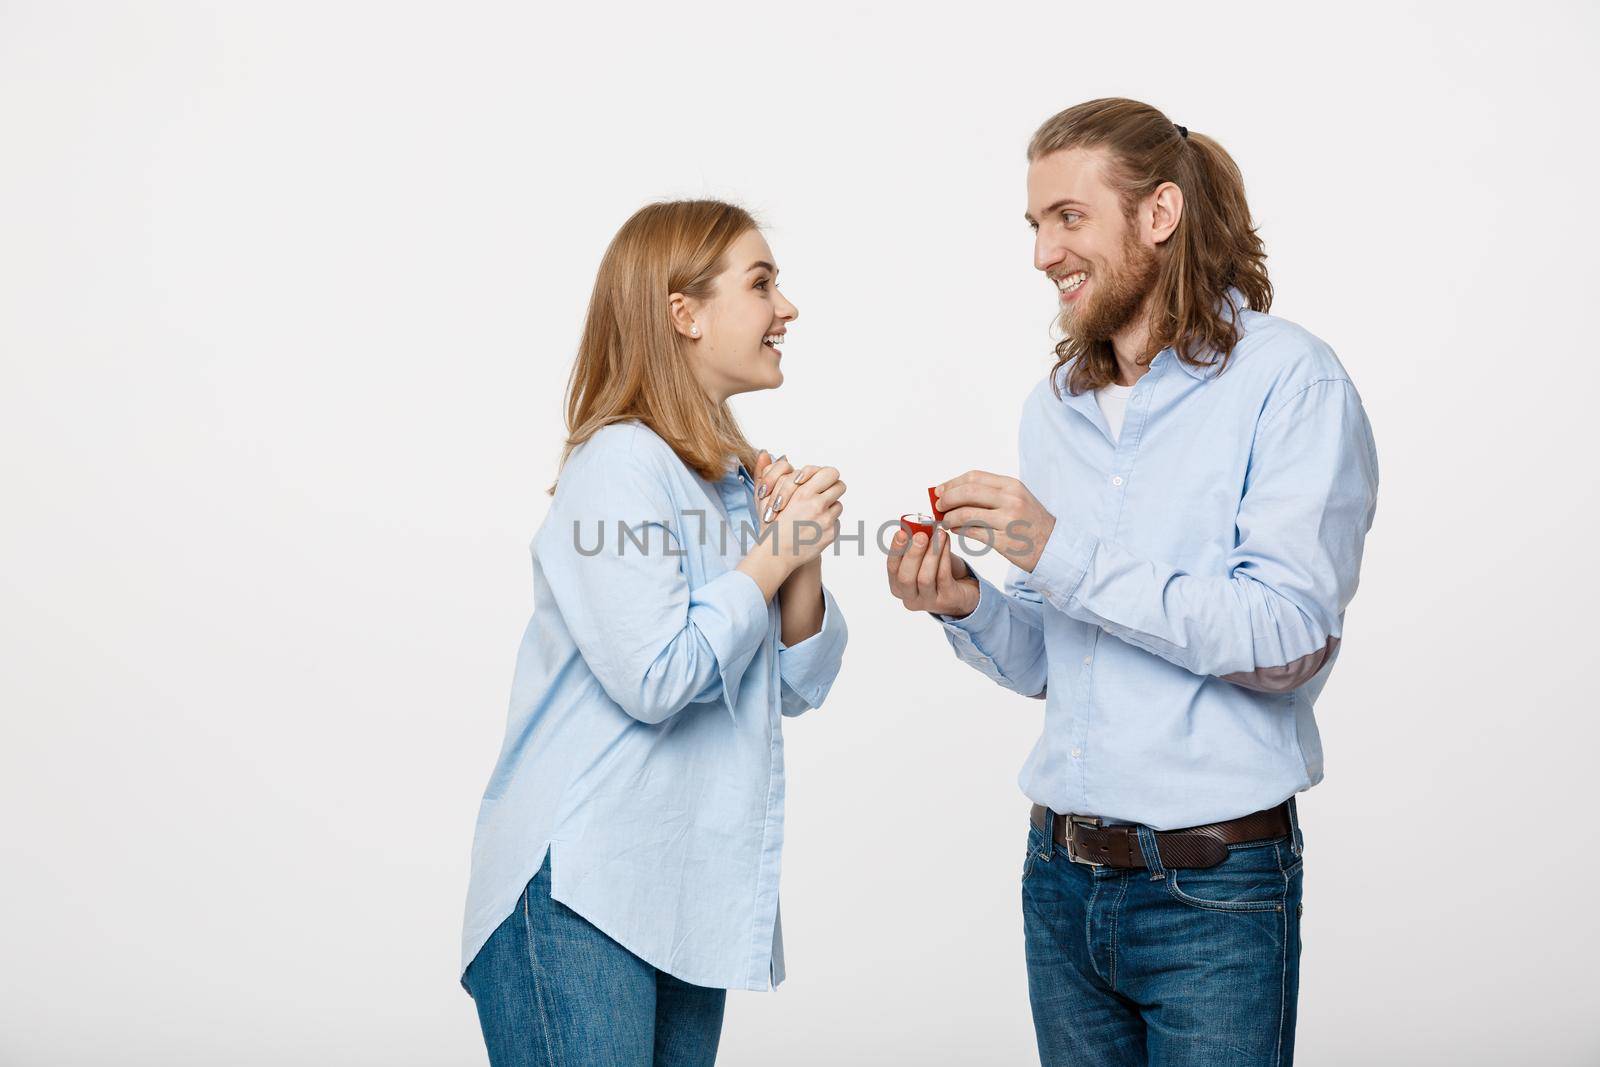 Proposal concept - Portrait of man showing an engagement ring diamond to his beutiful girlfriend over isolated white background .